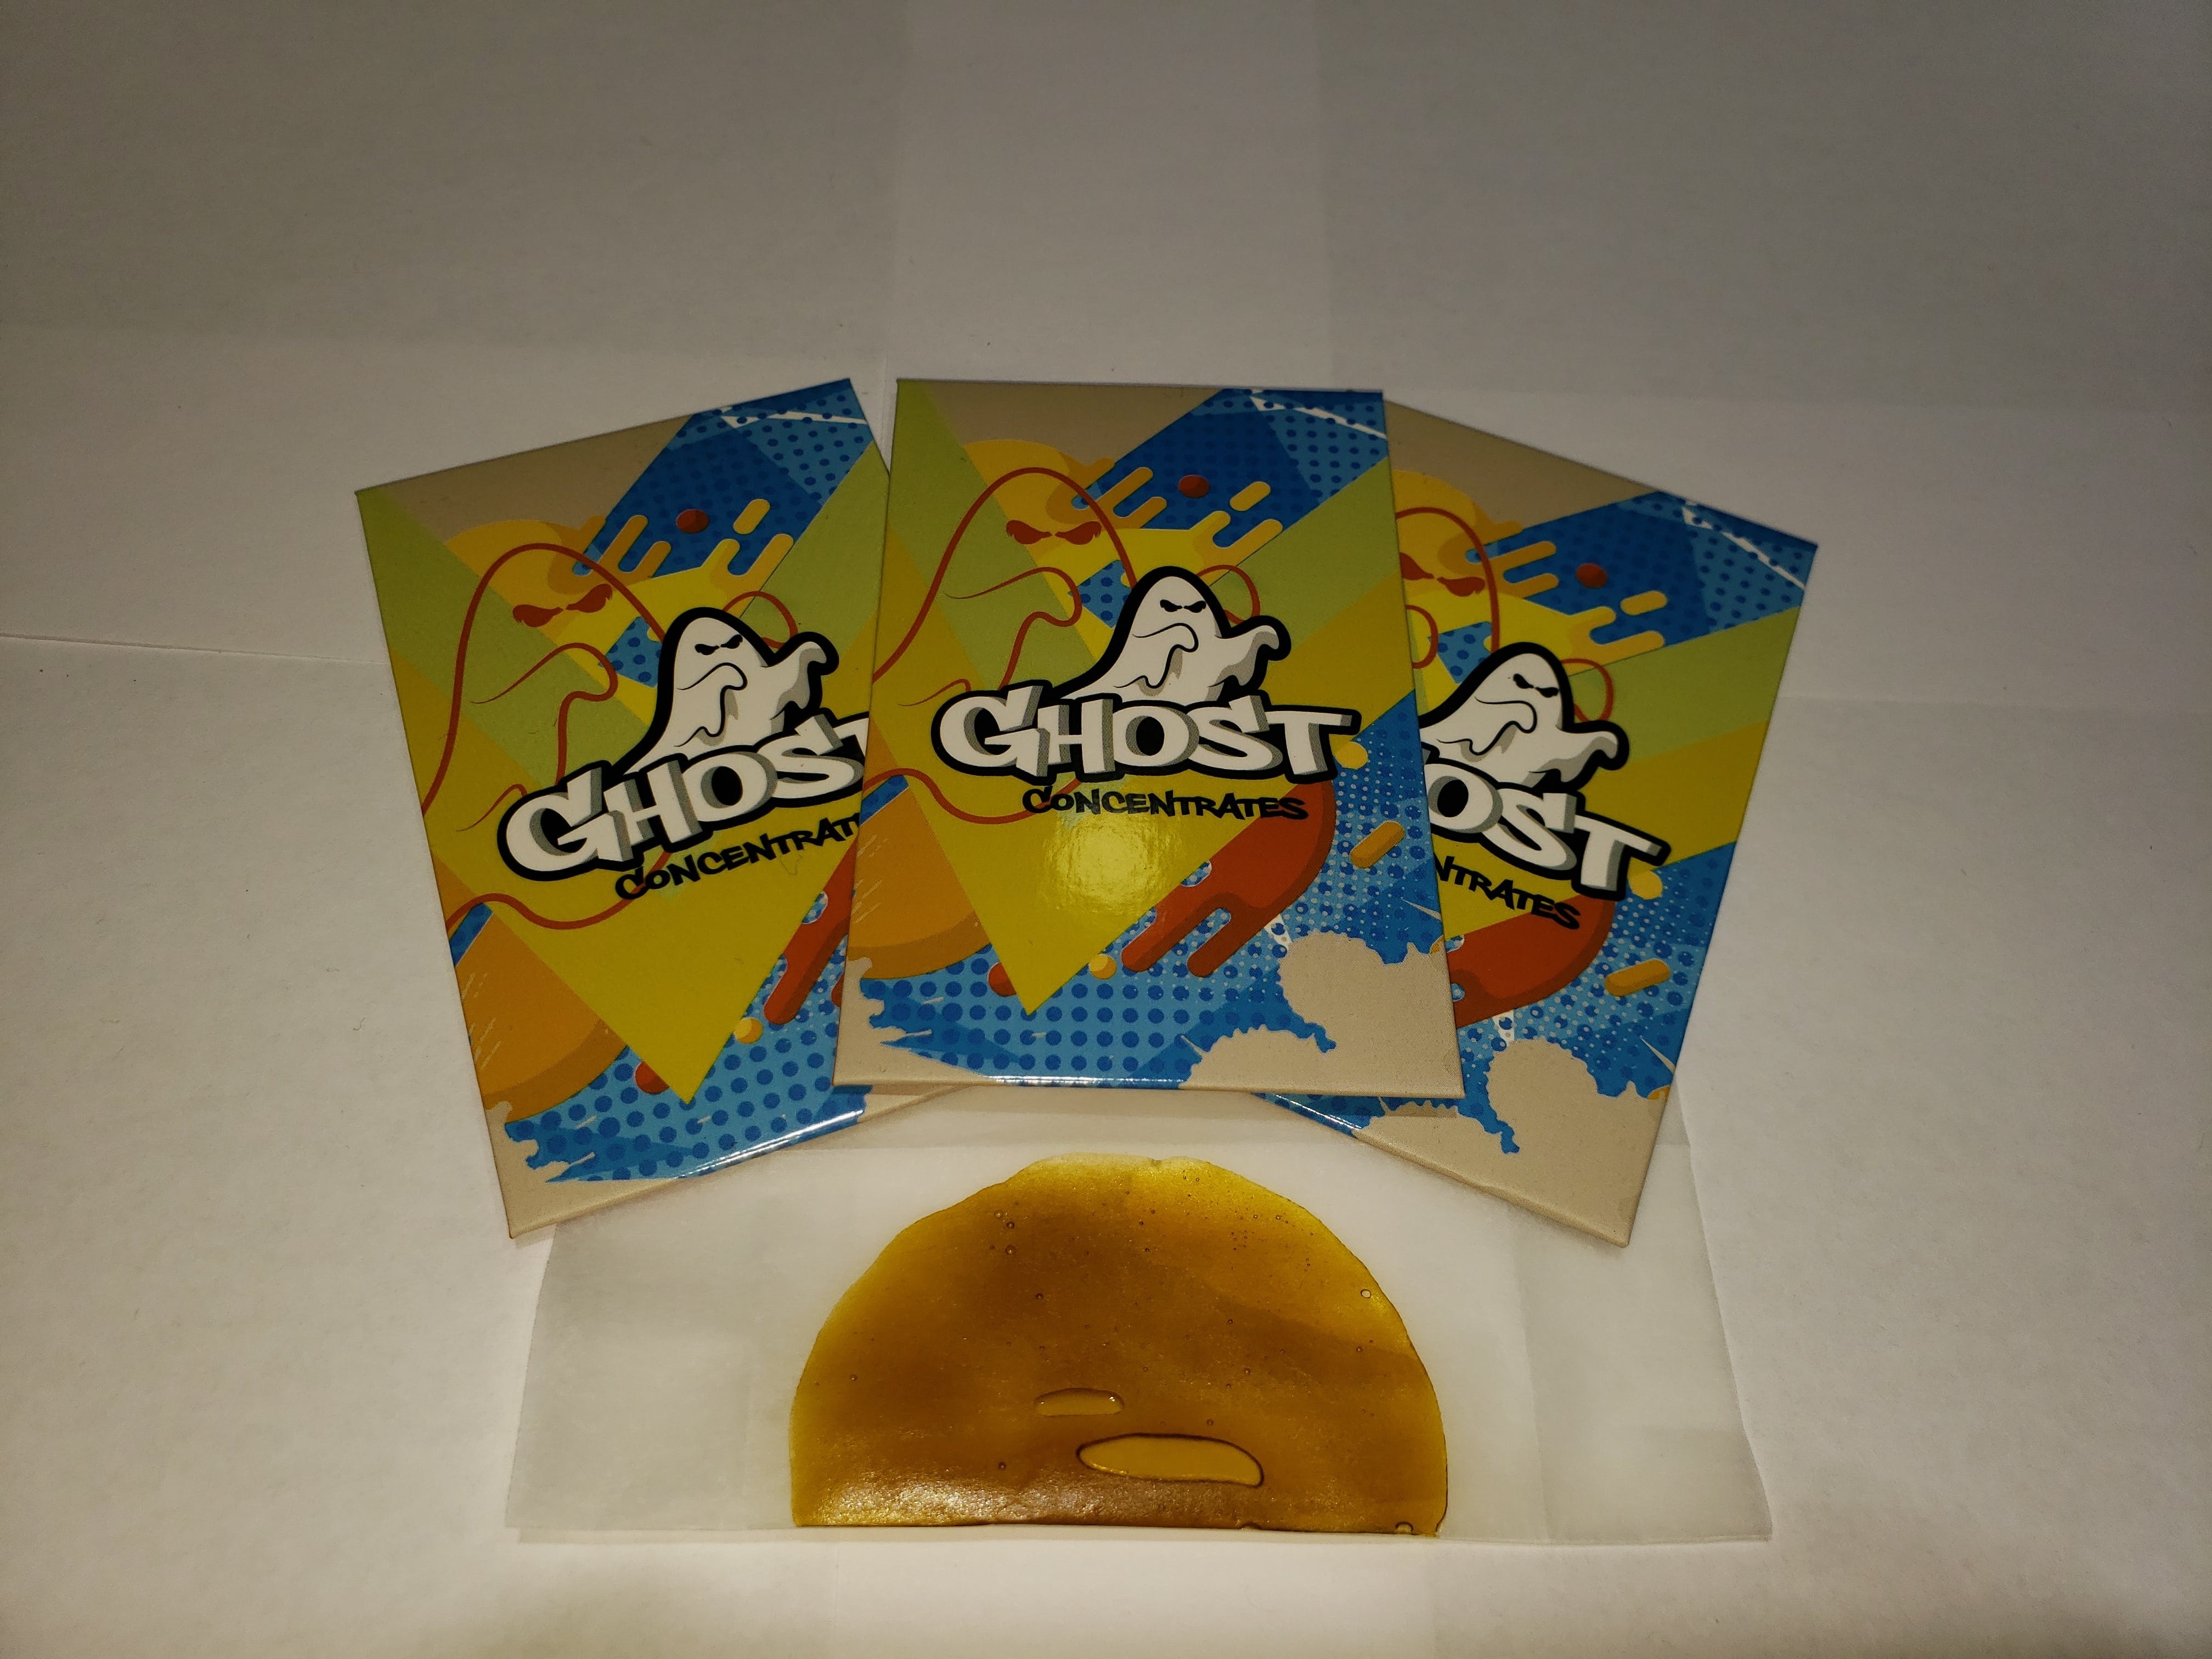 wax-ghost-extracts-1g-shatter